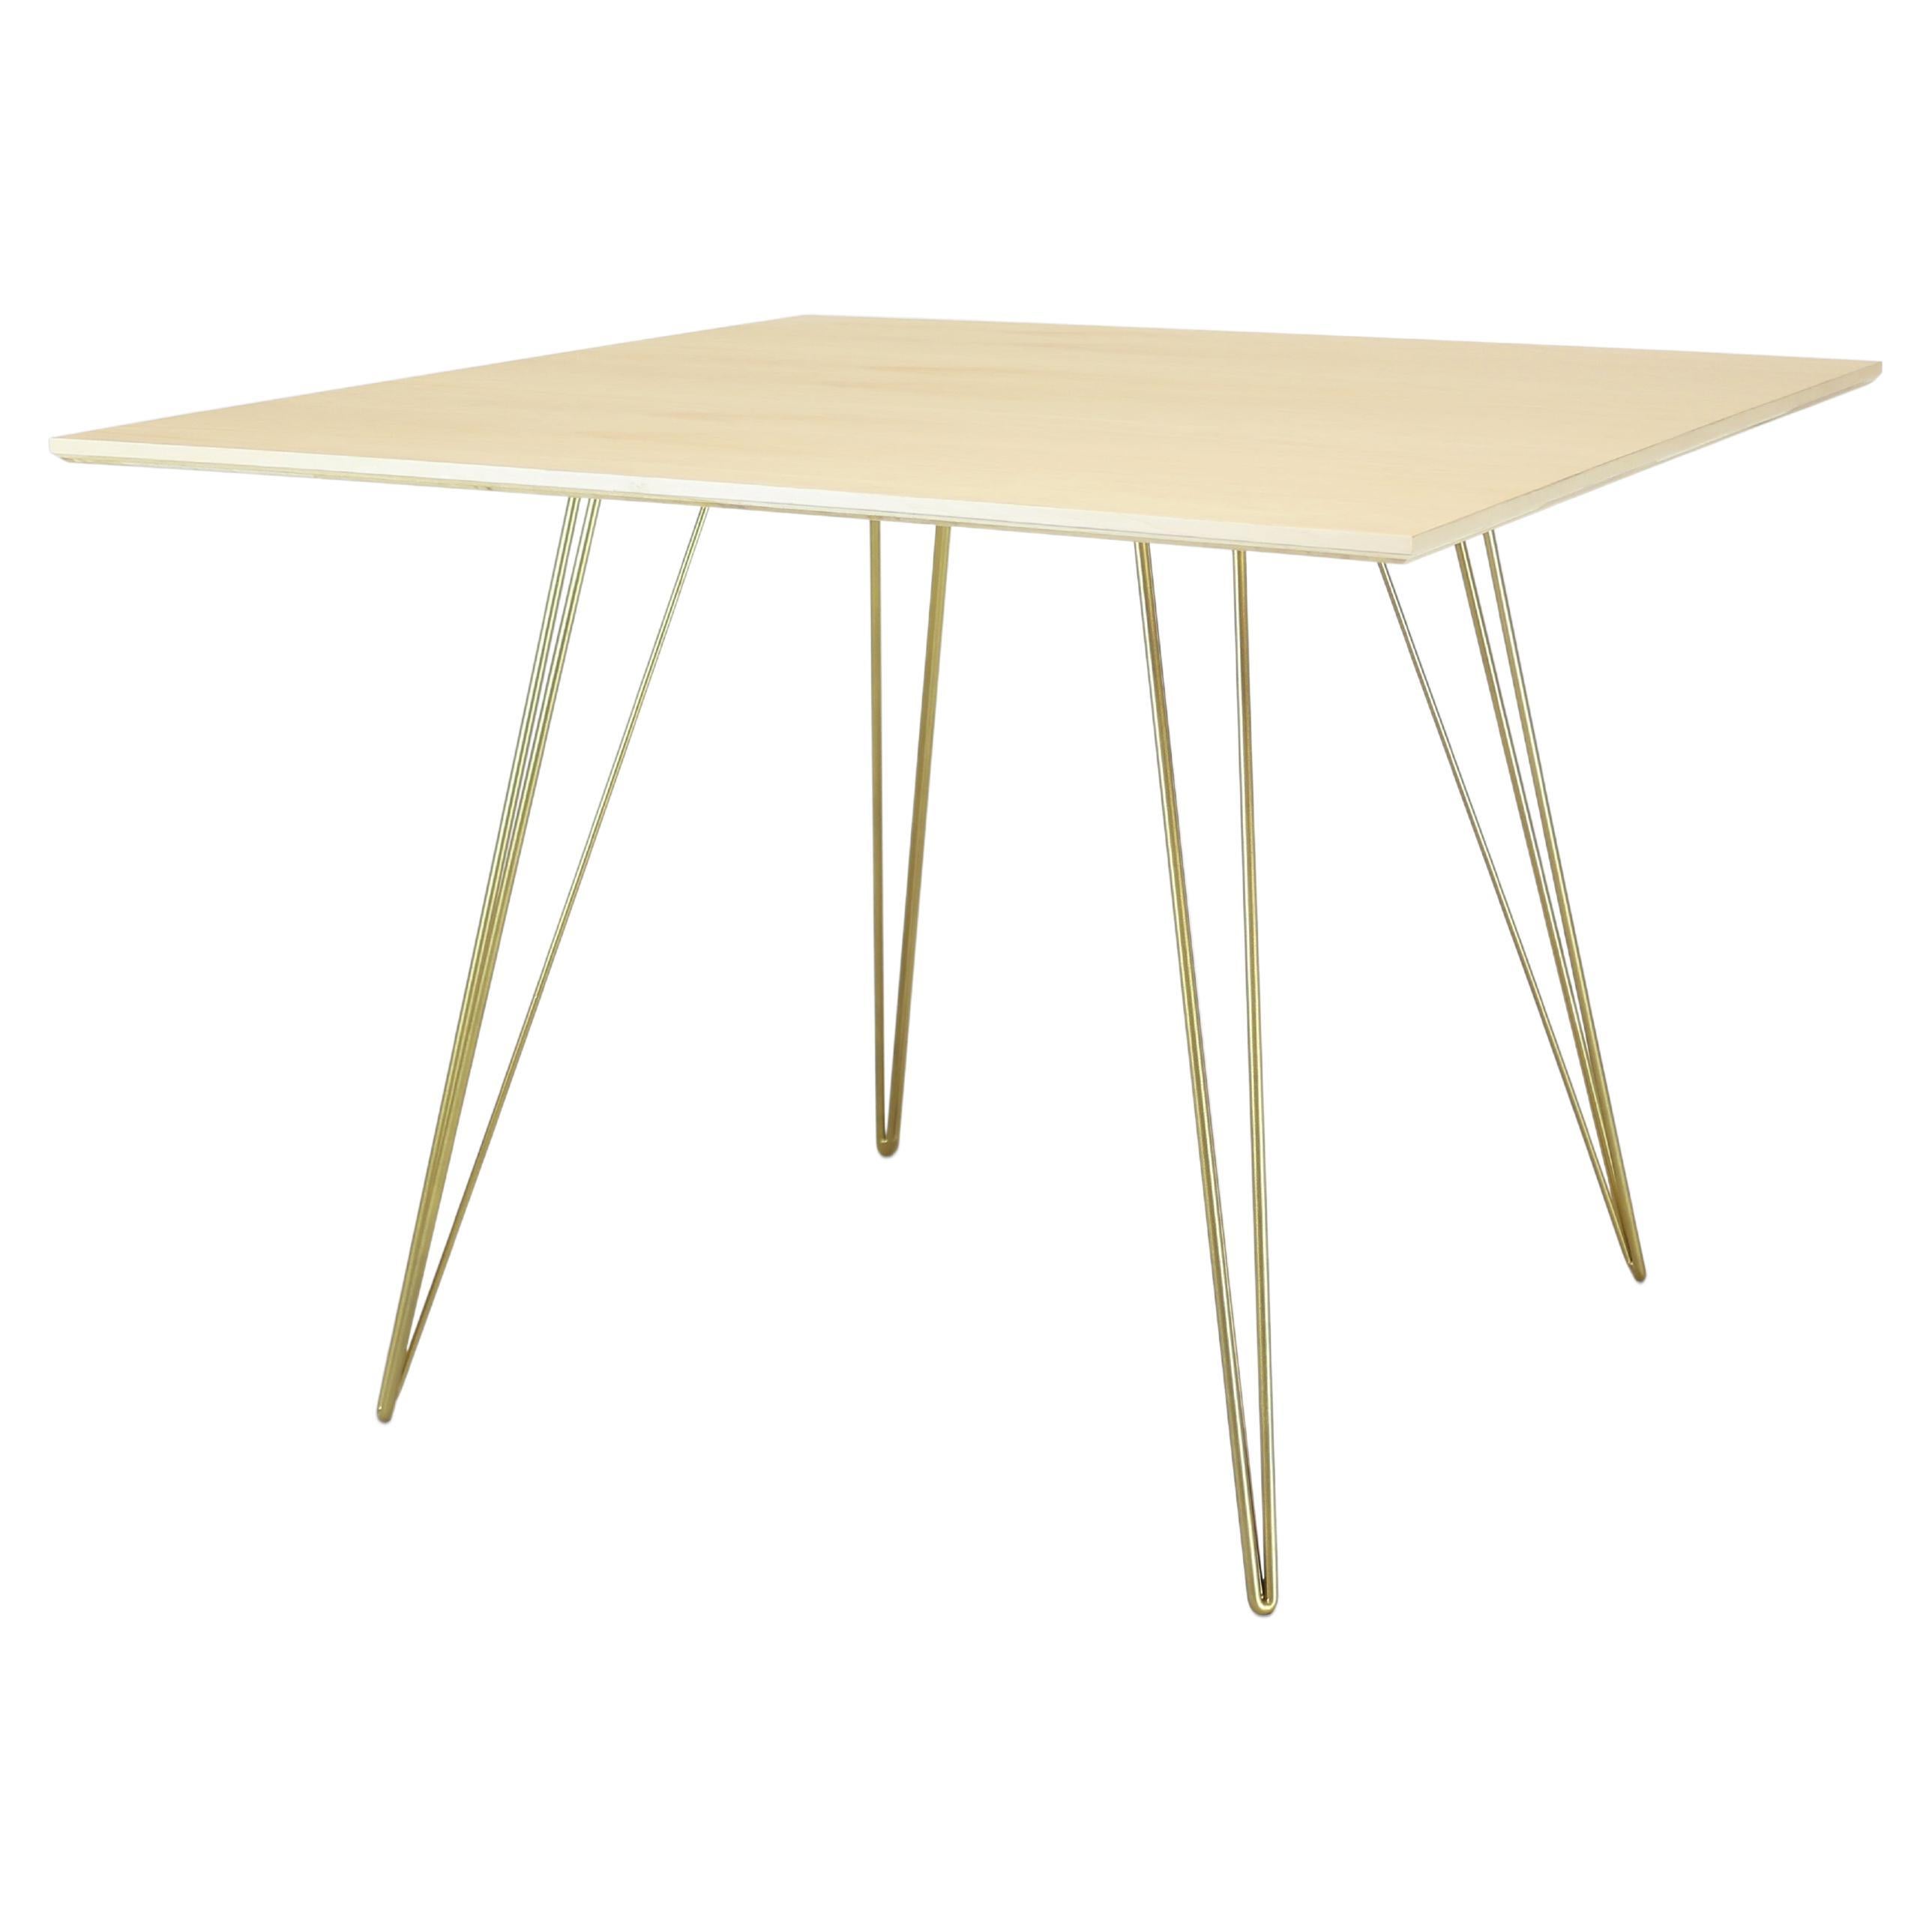 Maple Williams Dining Table Gold Hairpin Legs, Square Top